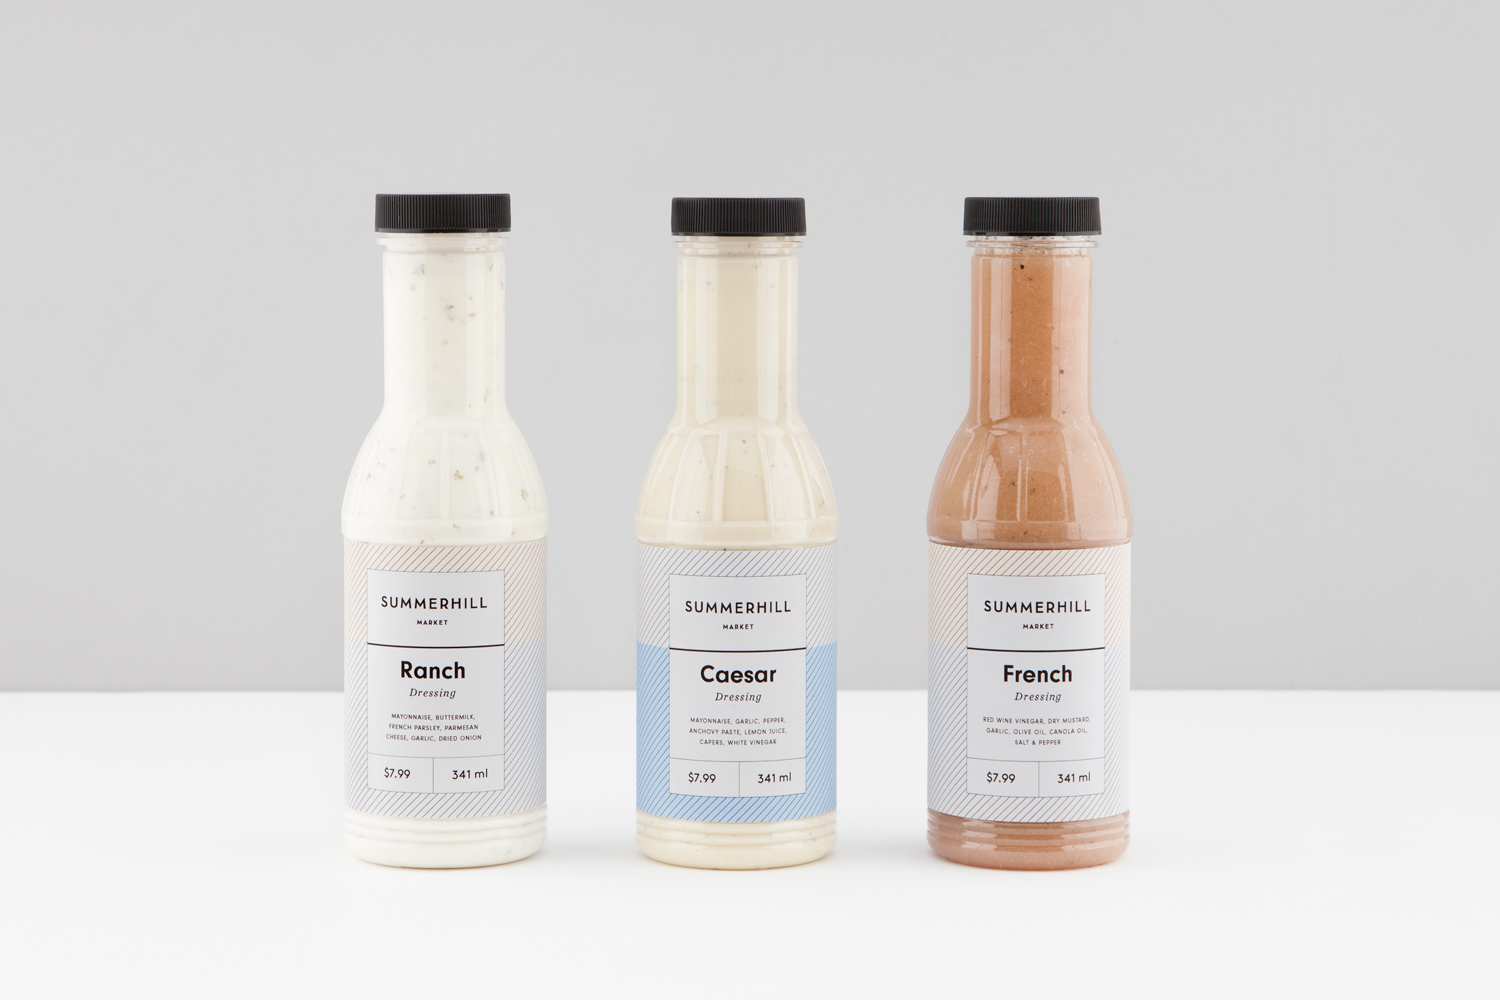 Salad dressing packaging design by Canadian studio Blok for Toronto based boutique grocery store Summerhill Market